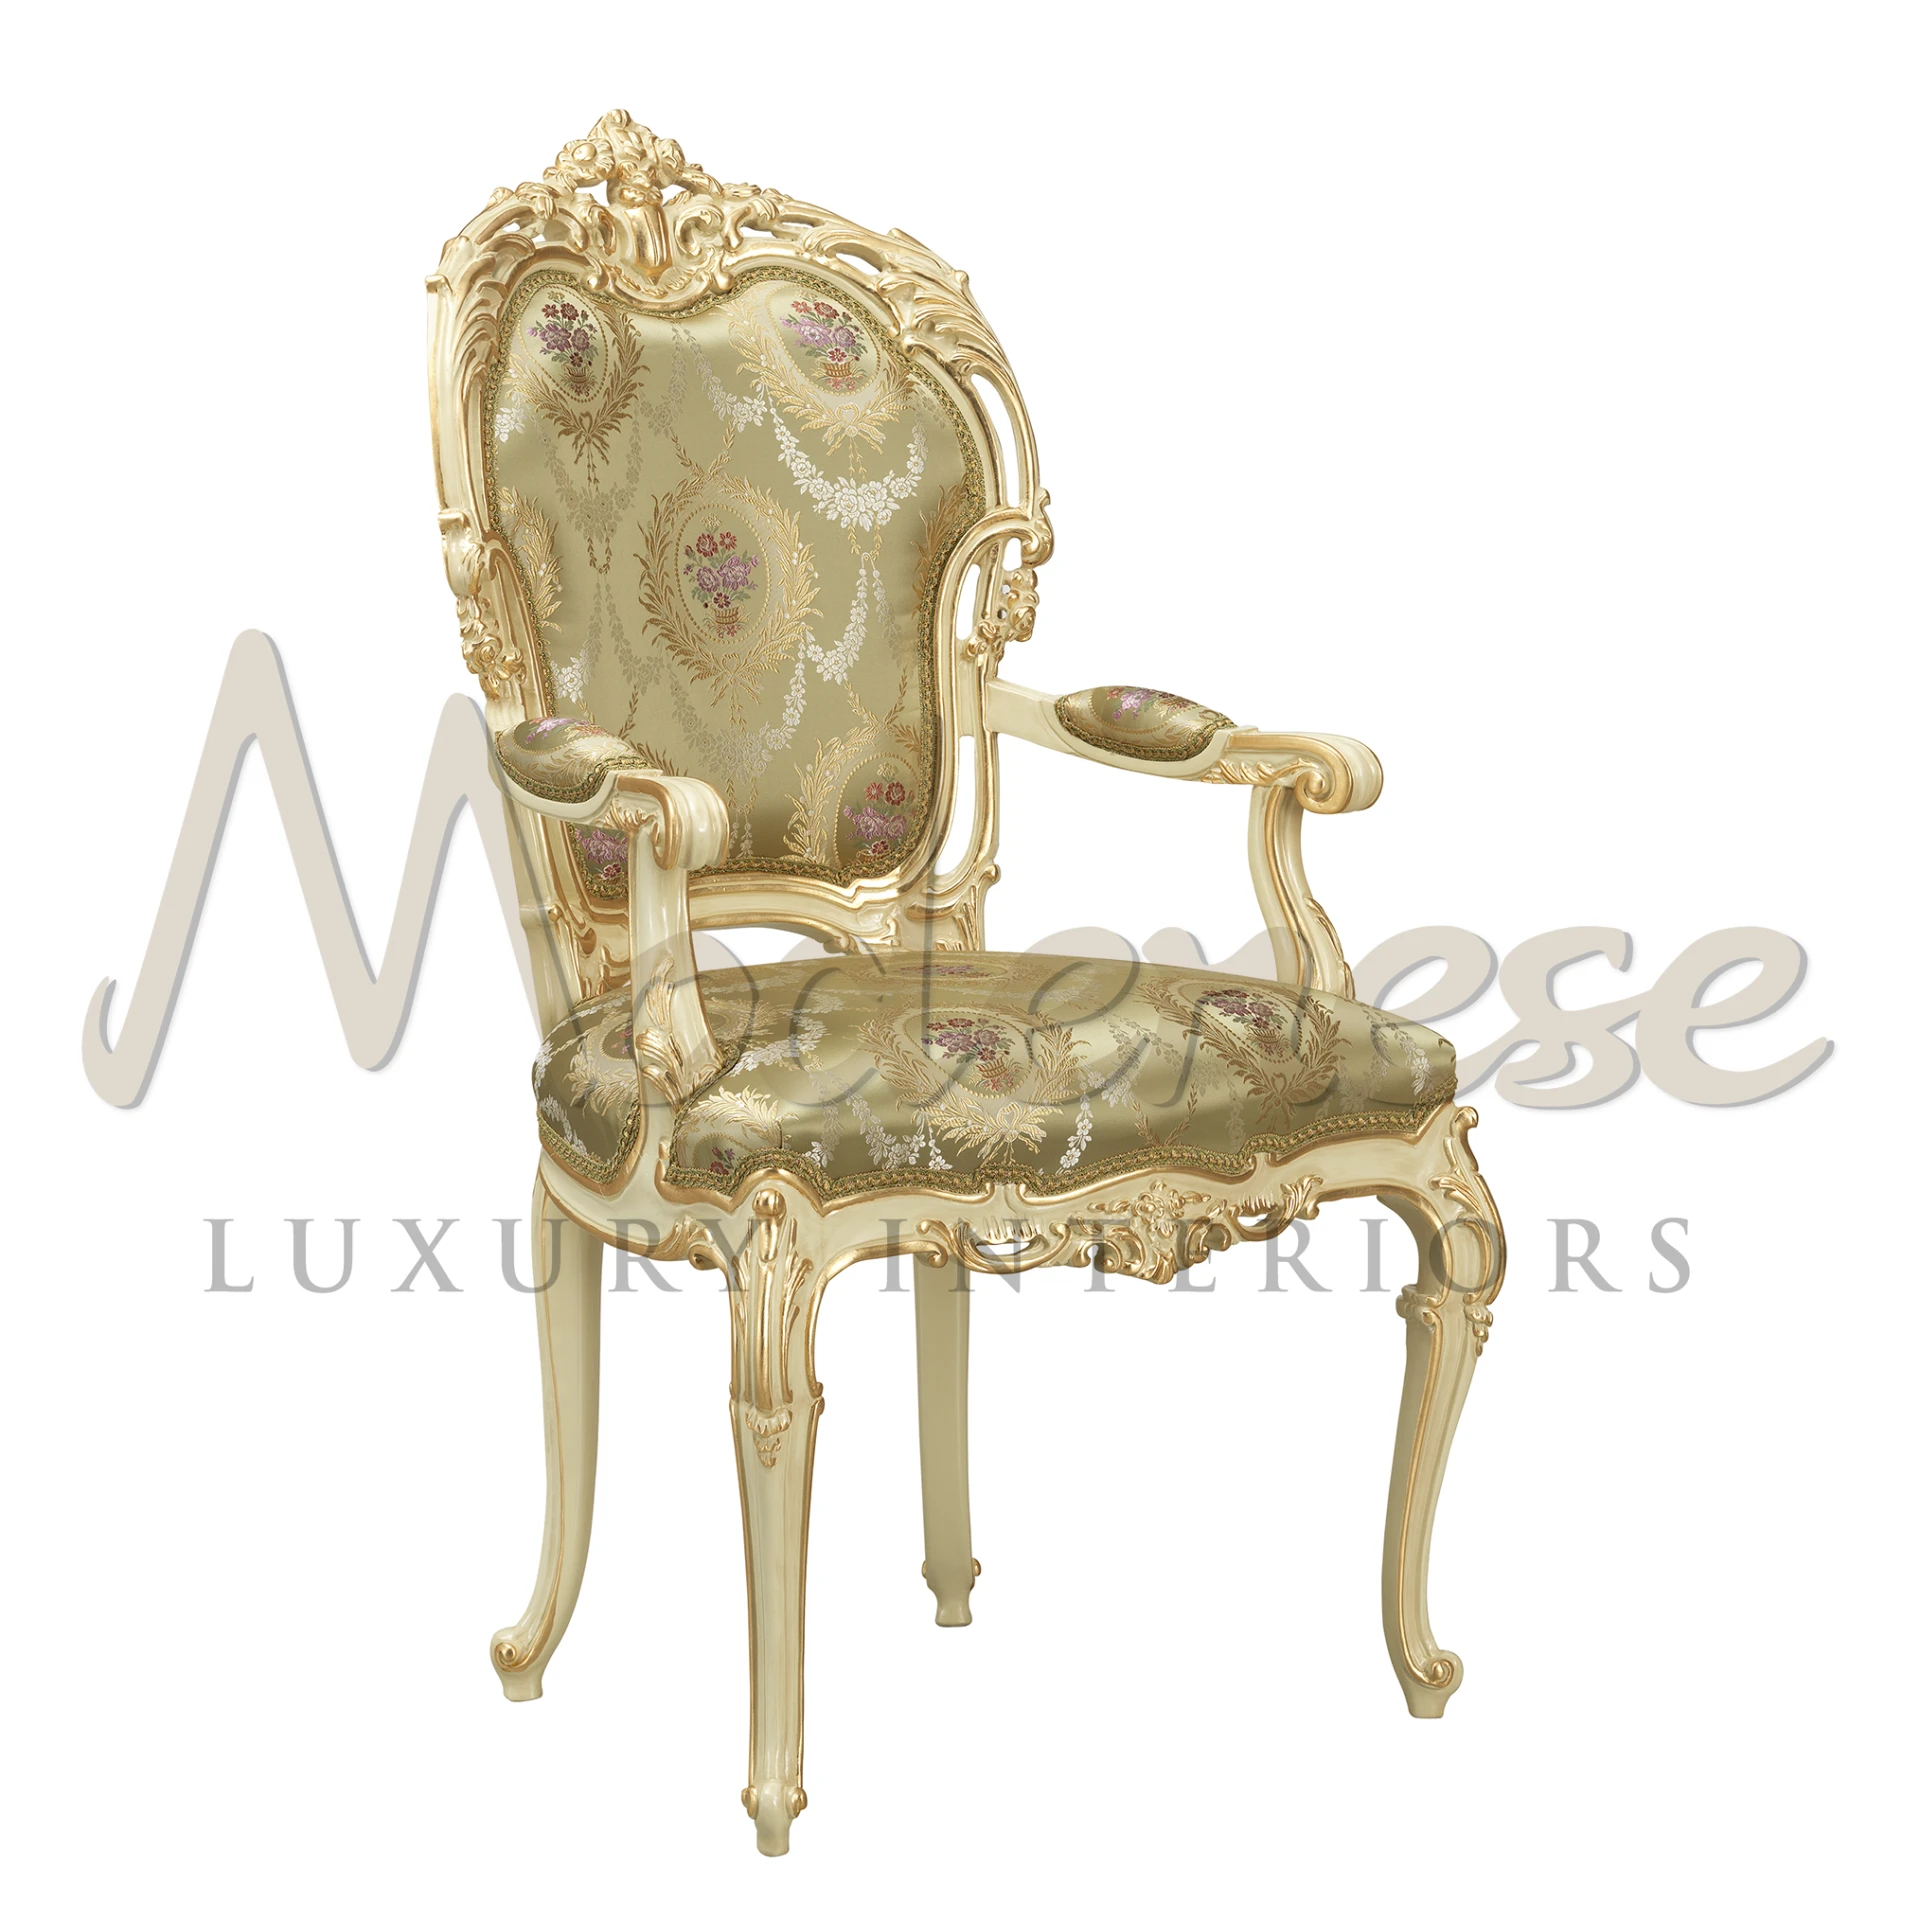 Luxurious Italian chair with fancy armrests and richly embroidered fabric in gold accents